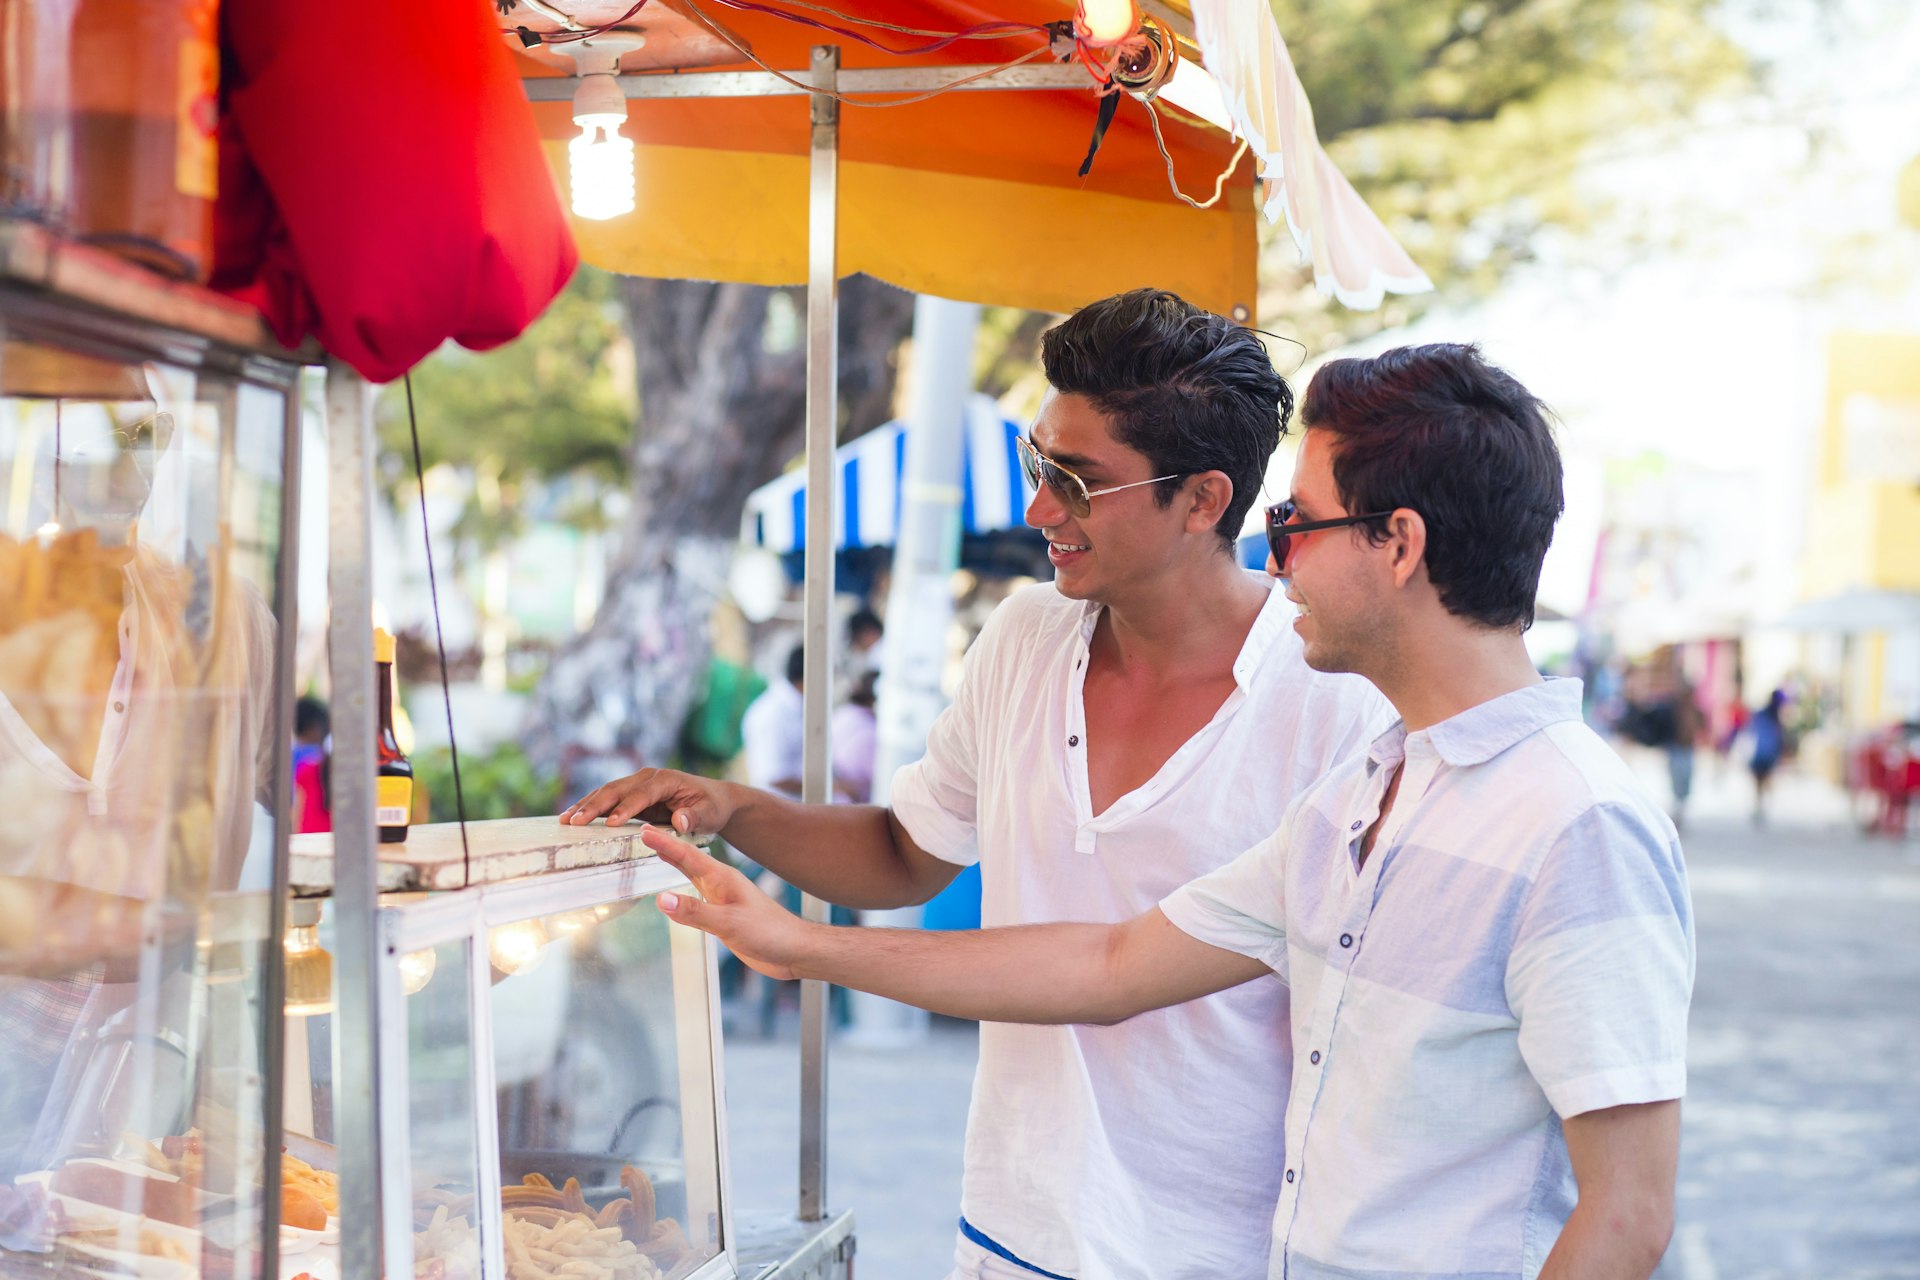 Two men purchasing food at a food truck in Mexico